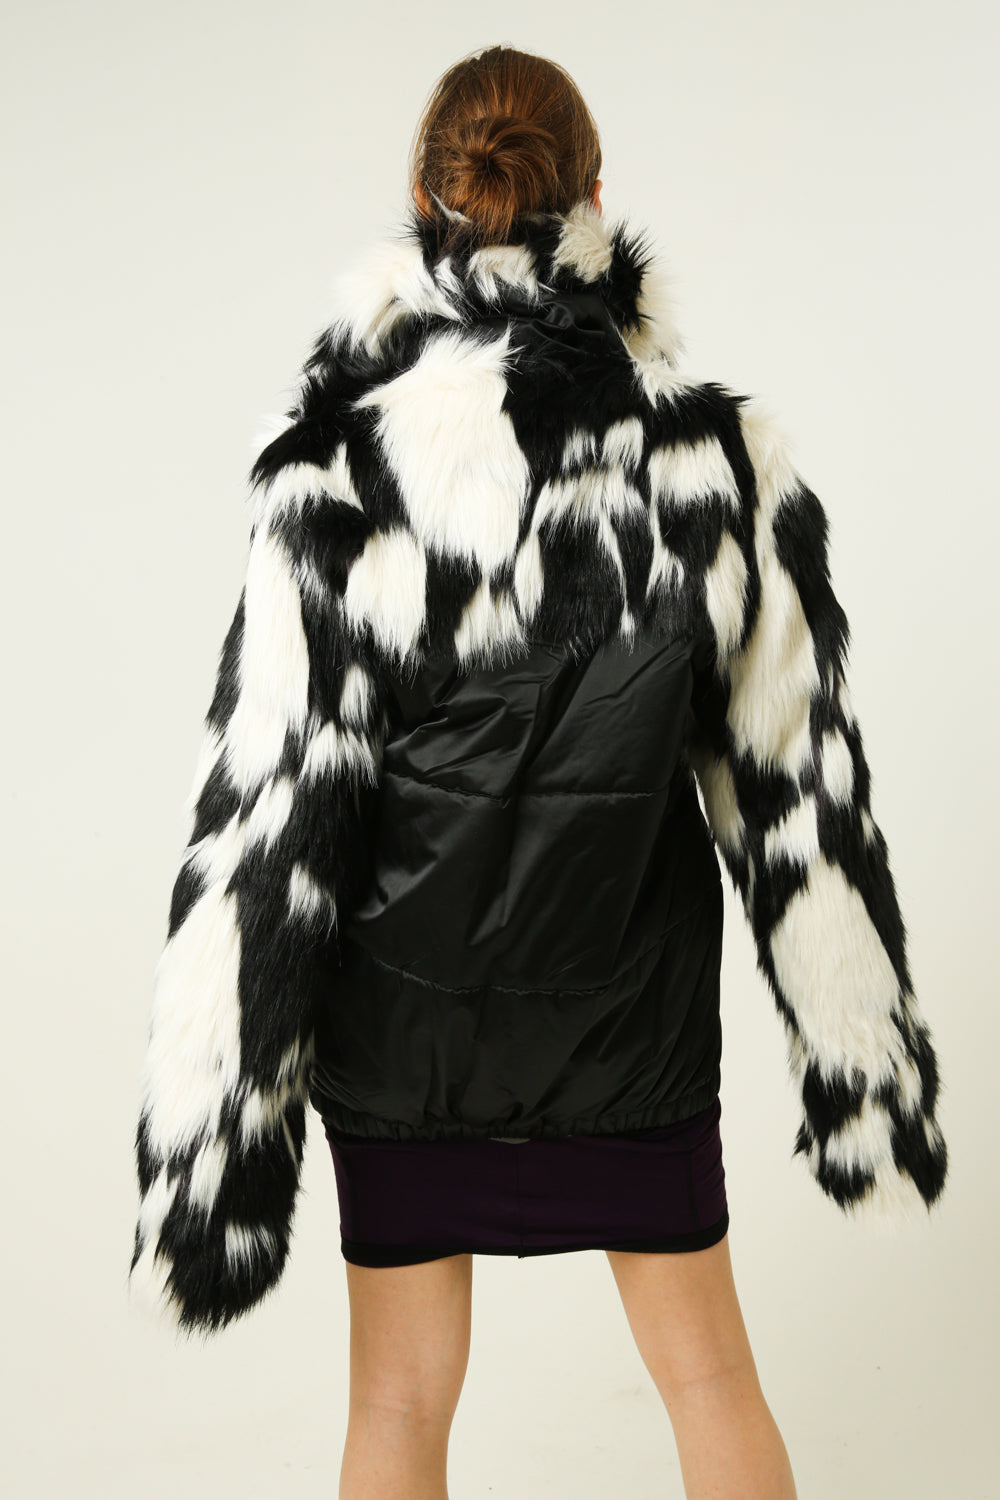 Jacket with faux fur trim on top